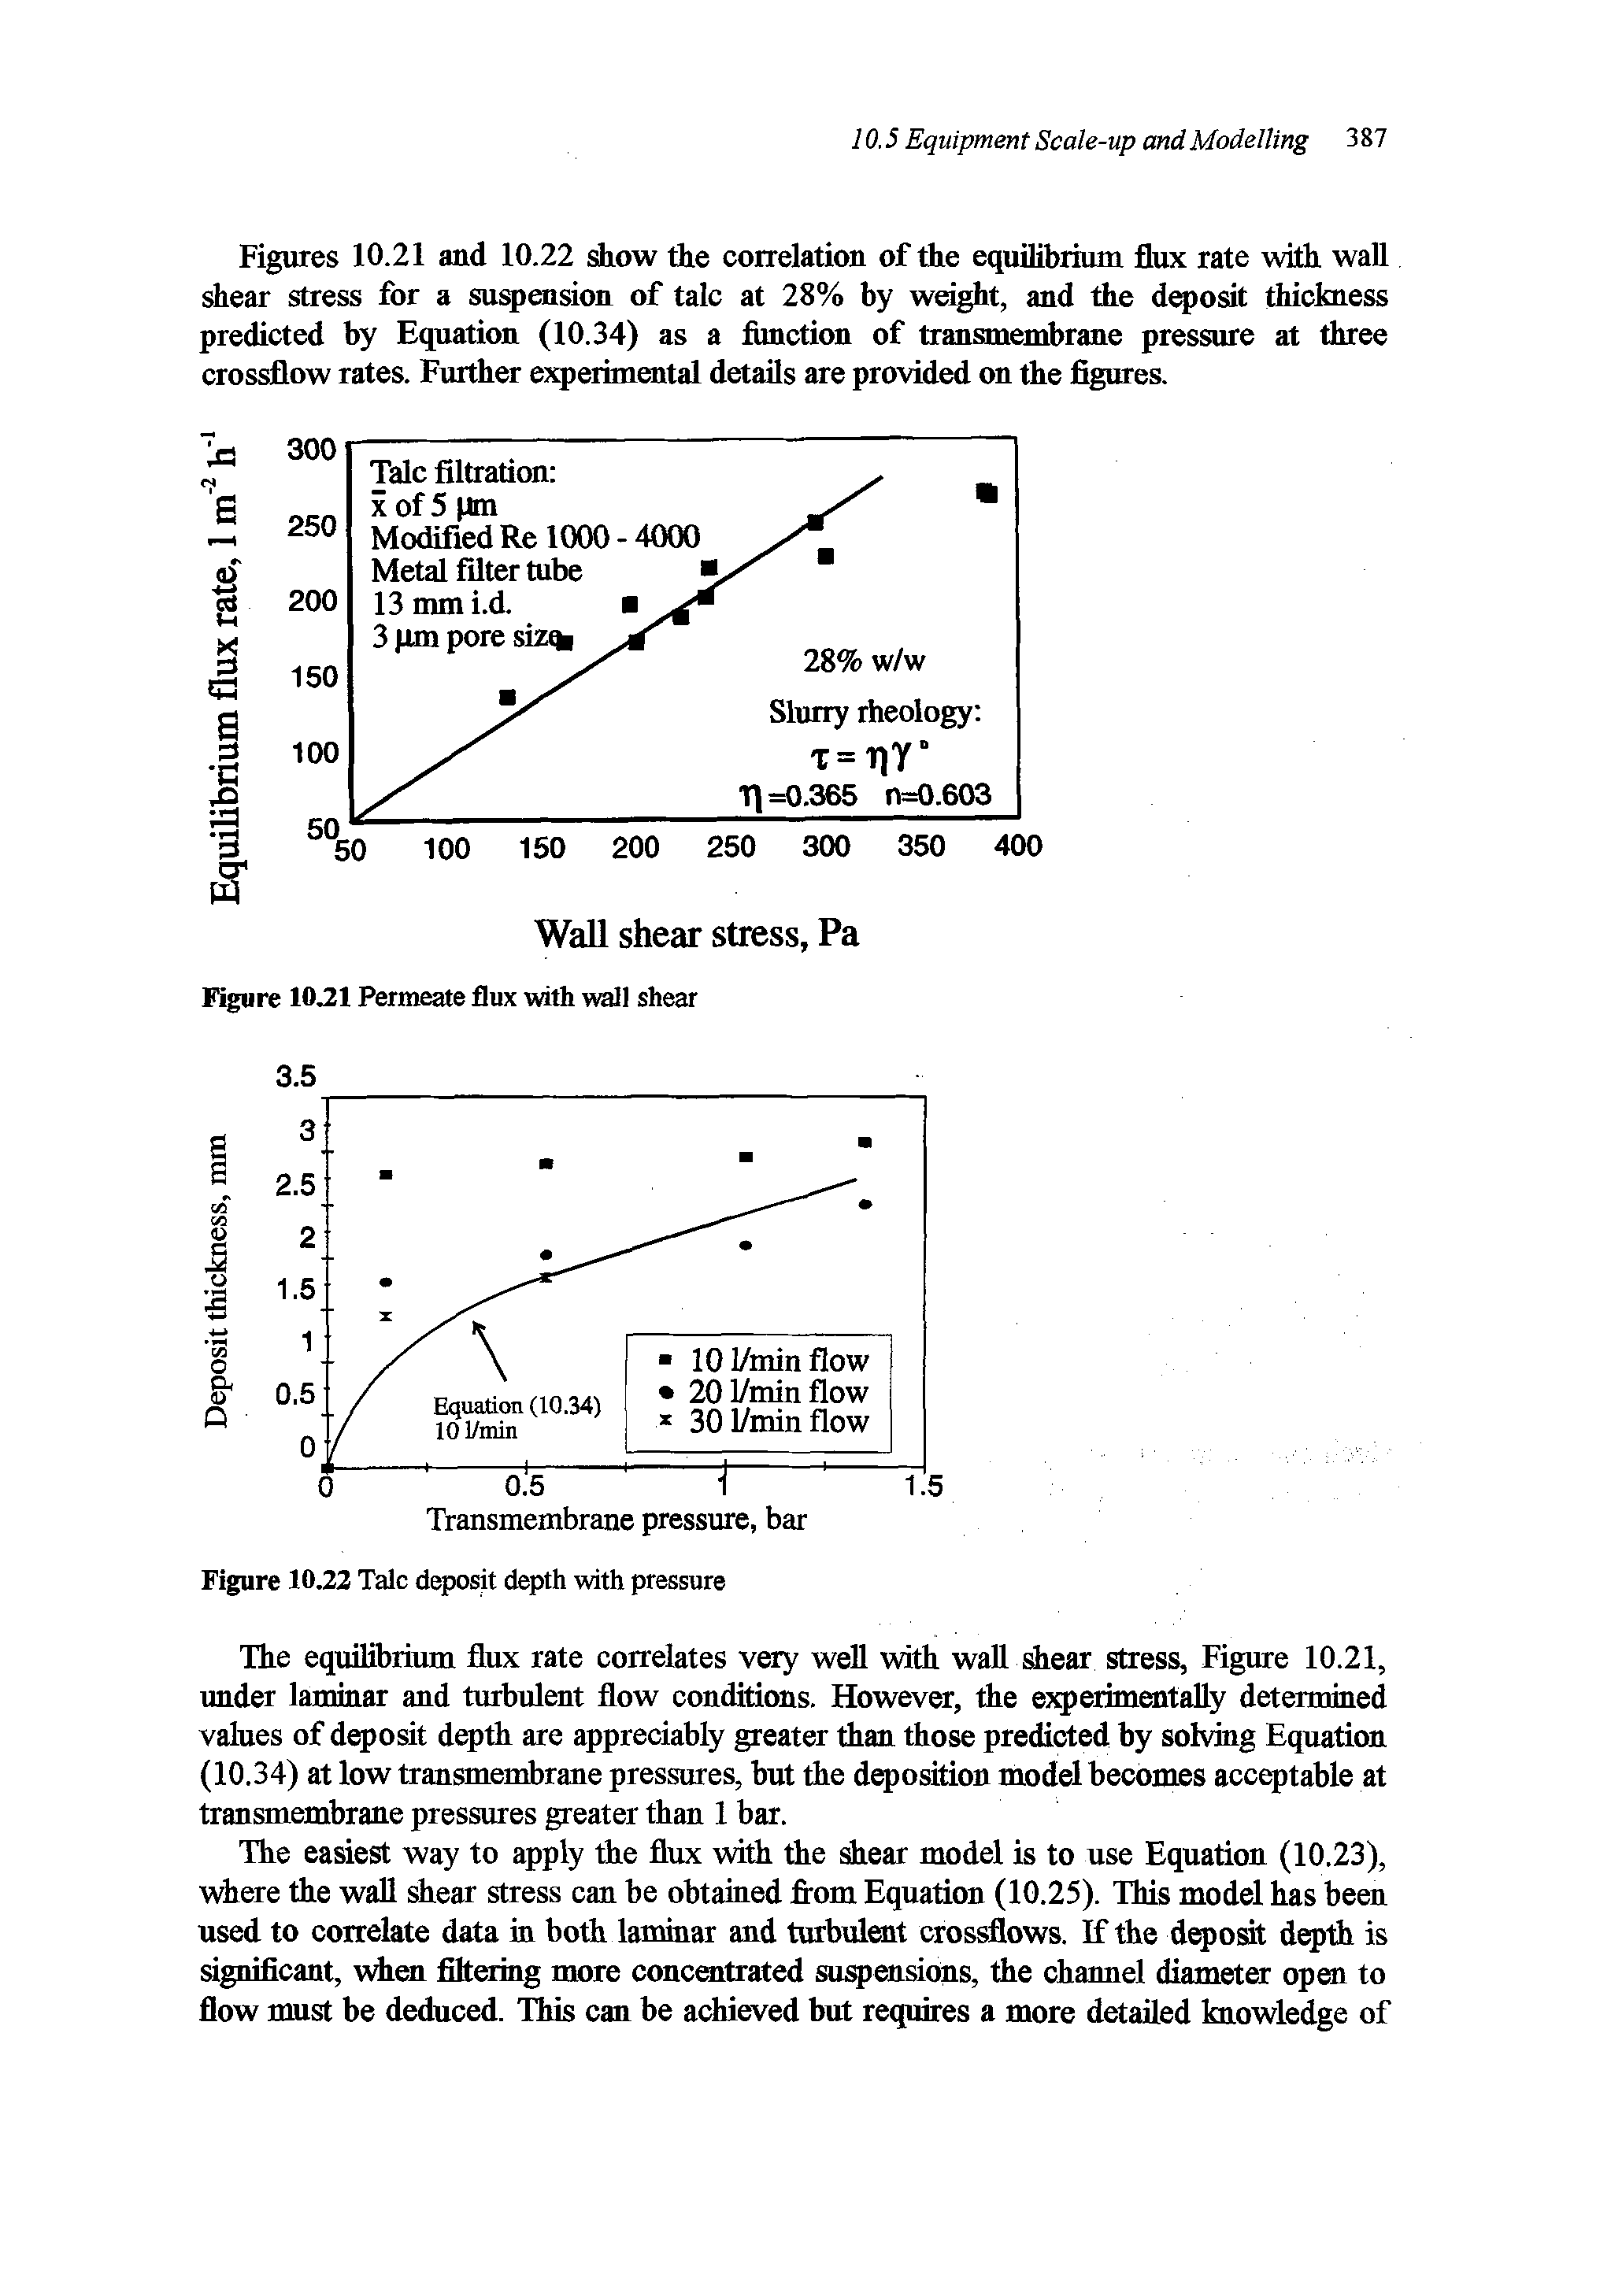 Figures 10.21 and 10.22 stow the correlation of the equilibrium flux rate with wall shear stress for a suspension of talc at 28% by weight, and the deposit thickness predicted by Equation (10.34) as a flmction of transmembrane pressure at three crossflow rates. Further e i erimental details are provided on the figures.